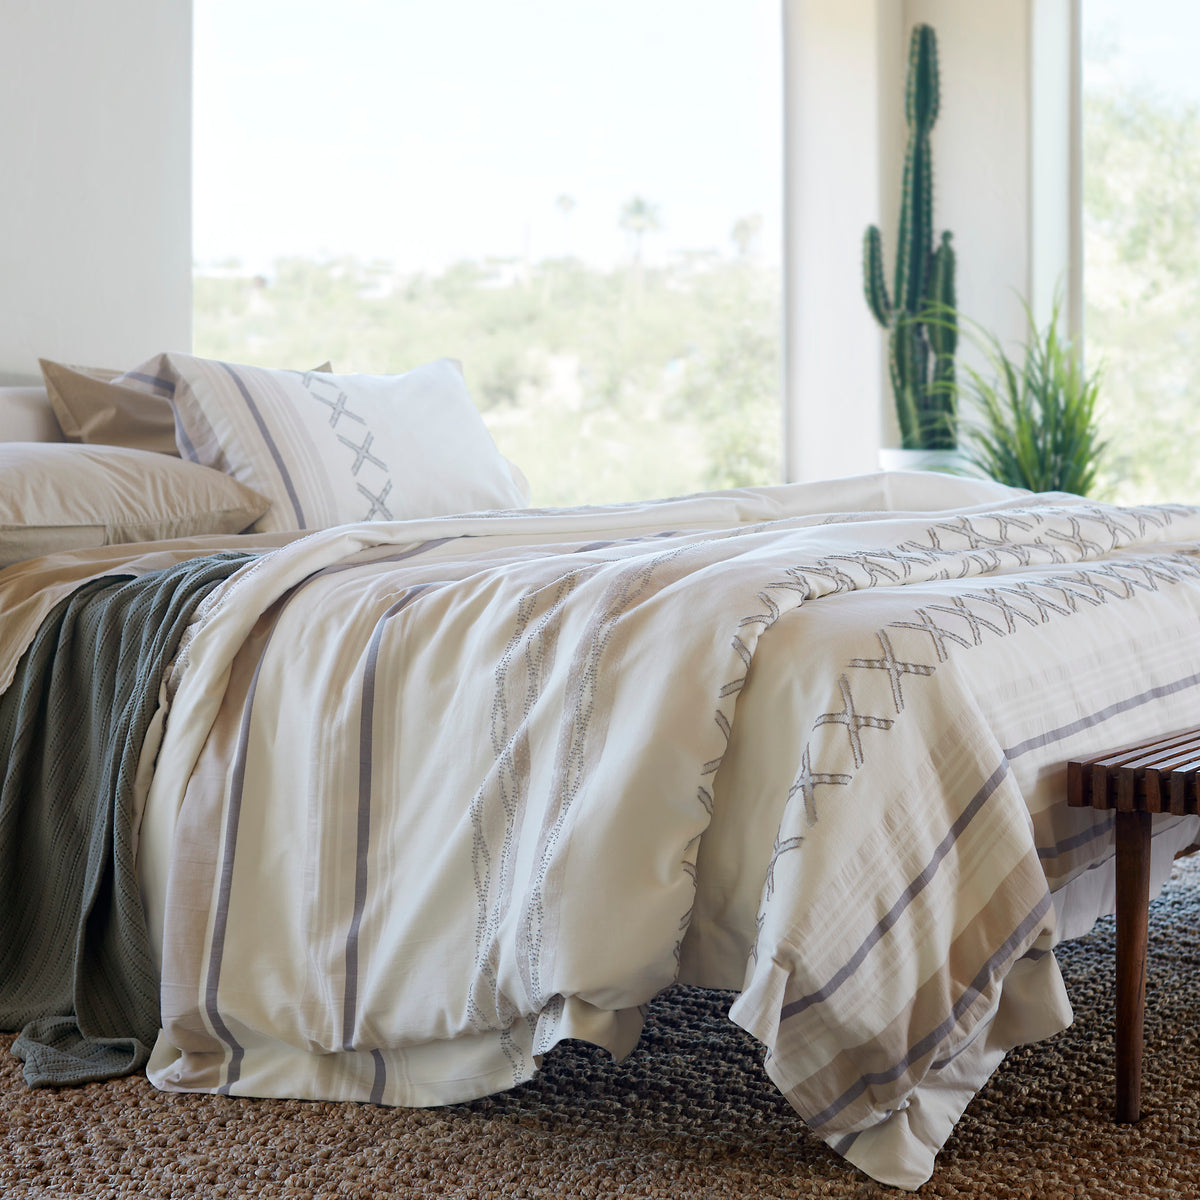 Image of a made bed with a large window behind it. The bed showcases Ochre Garment Washed Percale Sheets, an Agave Ridgeback Coverlet, and a Sonoran Duvet Cover.